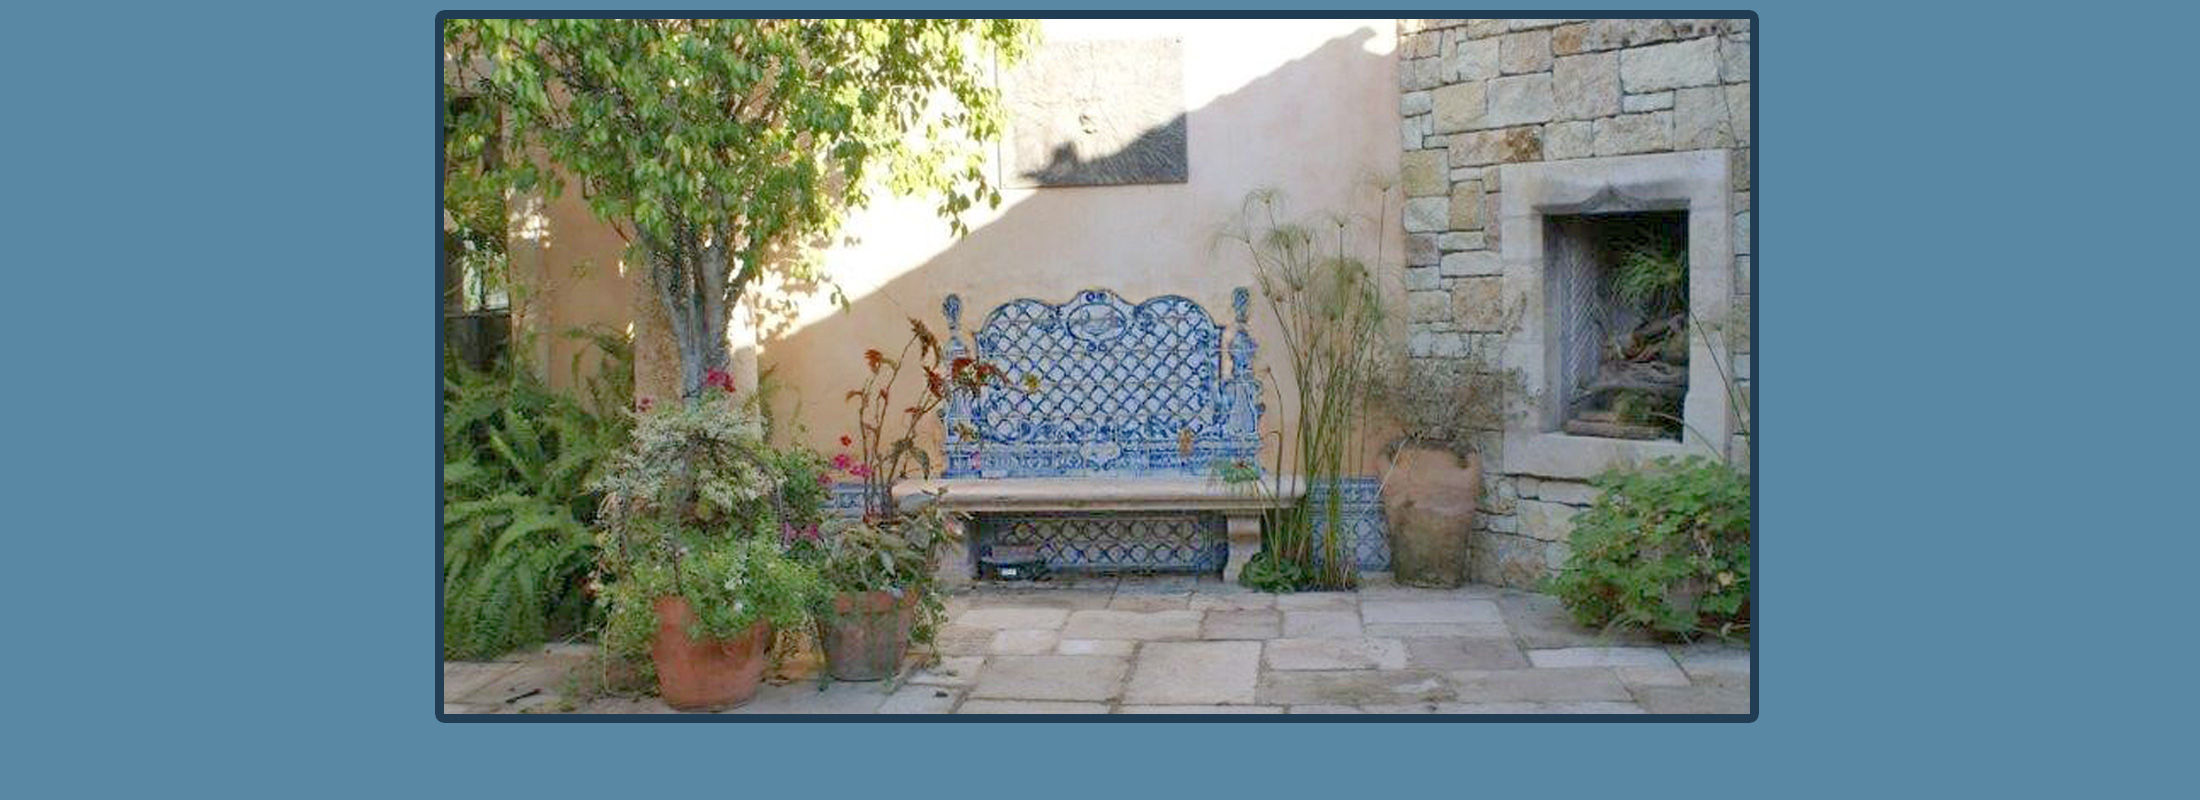 Bench created with Portuguese Tiles - Azulejos